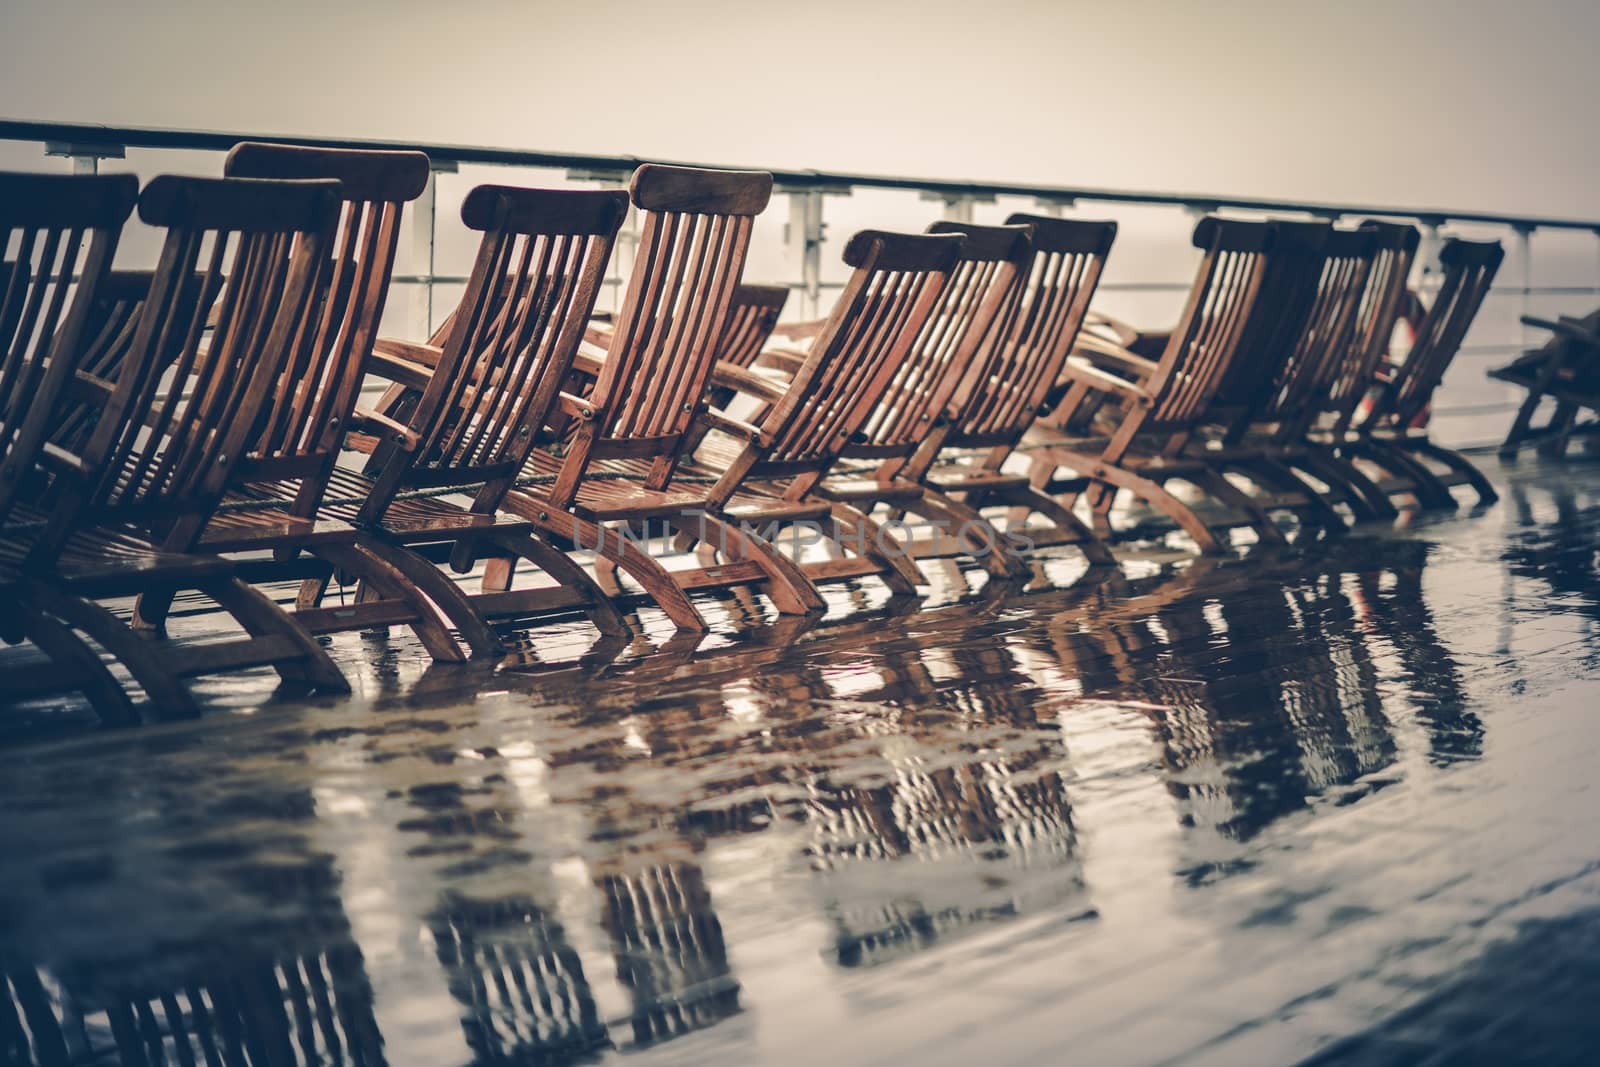 Rainy Cruise Vacation. Wet Main Wooden Deck and Deckchairs of the Cruise Ship. 